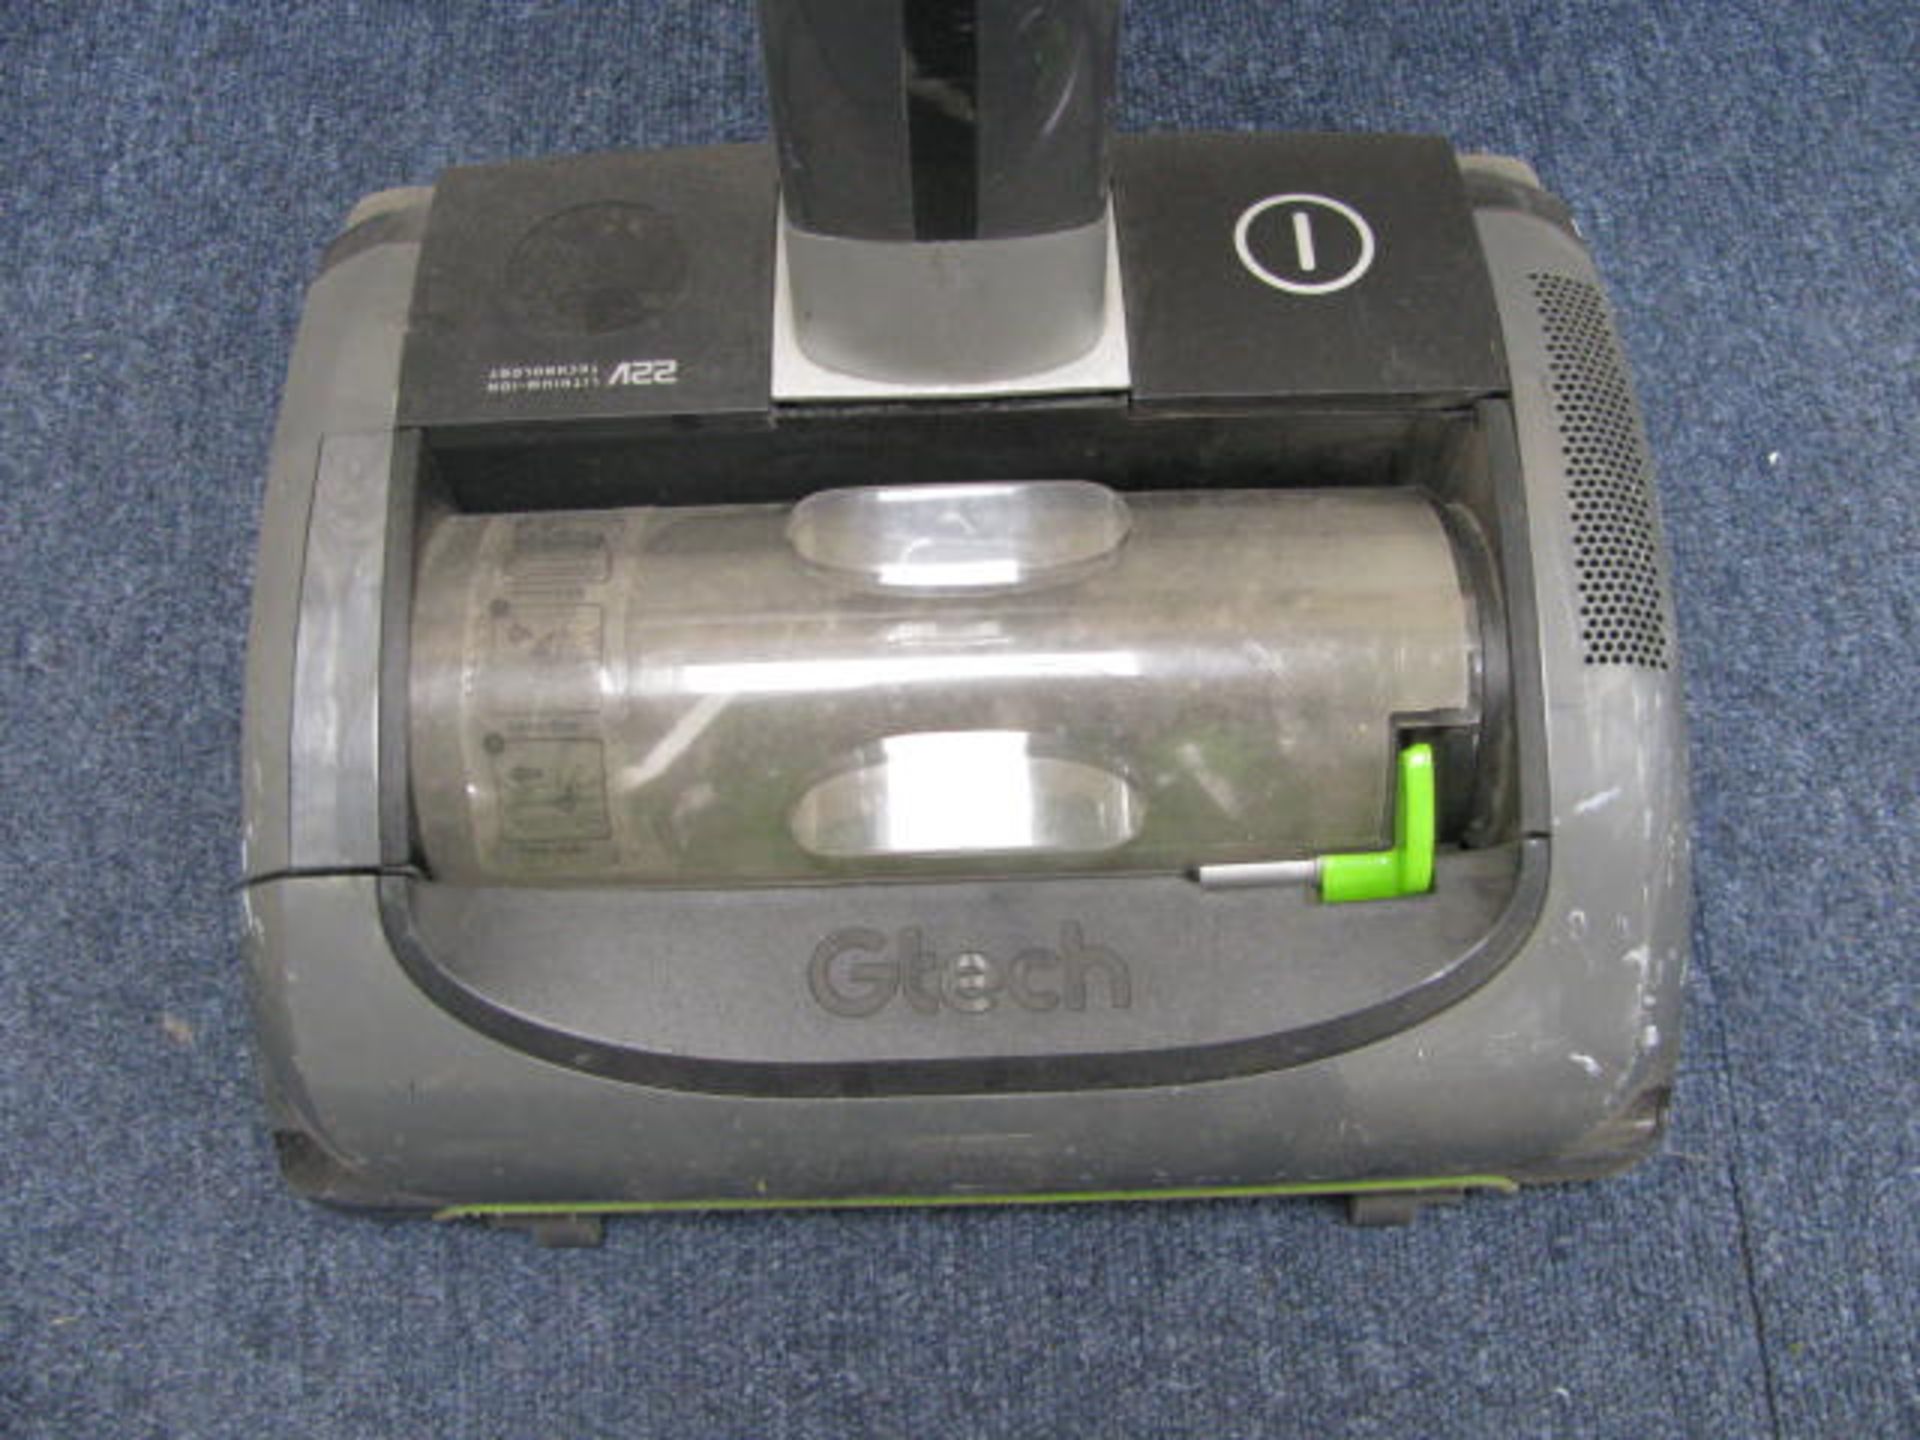 Pedestal fan, Pro Breeze mobile heater and Gtech Air Ram vacuum cleaner - Image 2 of 3